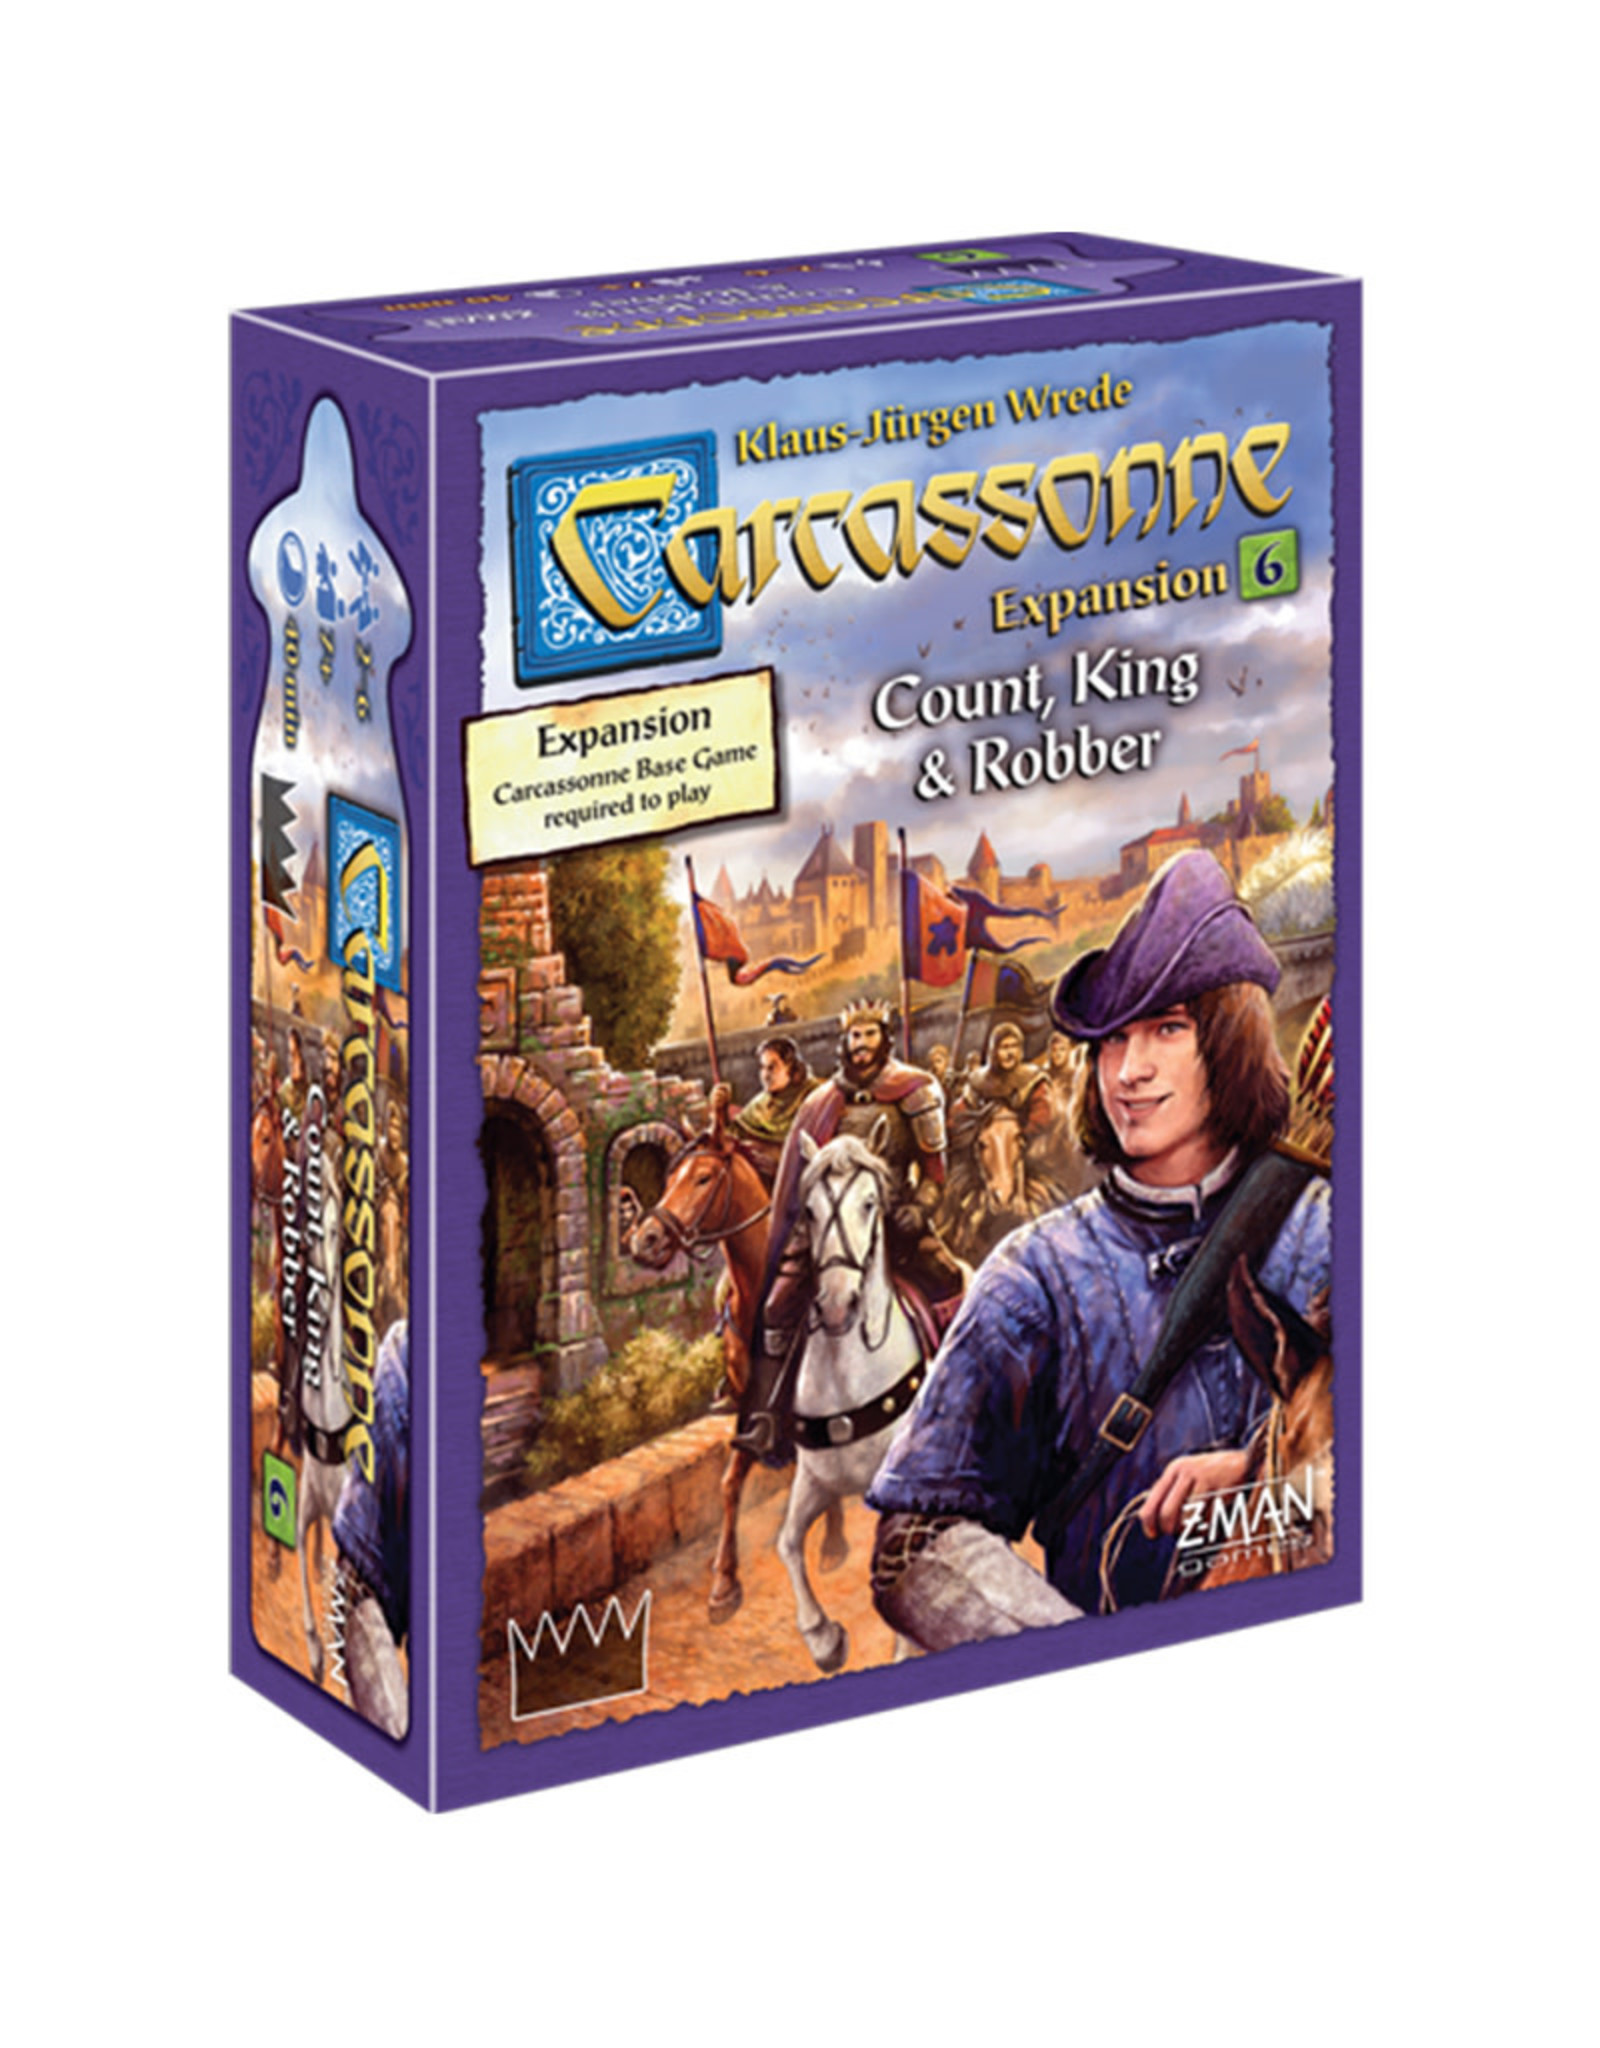 Carcassonne Expansion 6 Count/King/Robber - Game Night Games